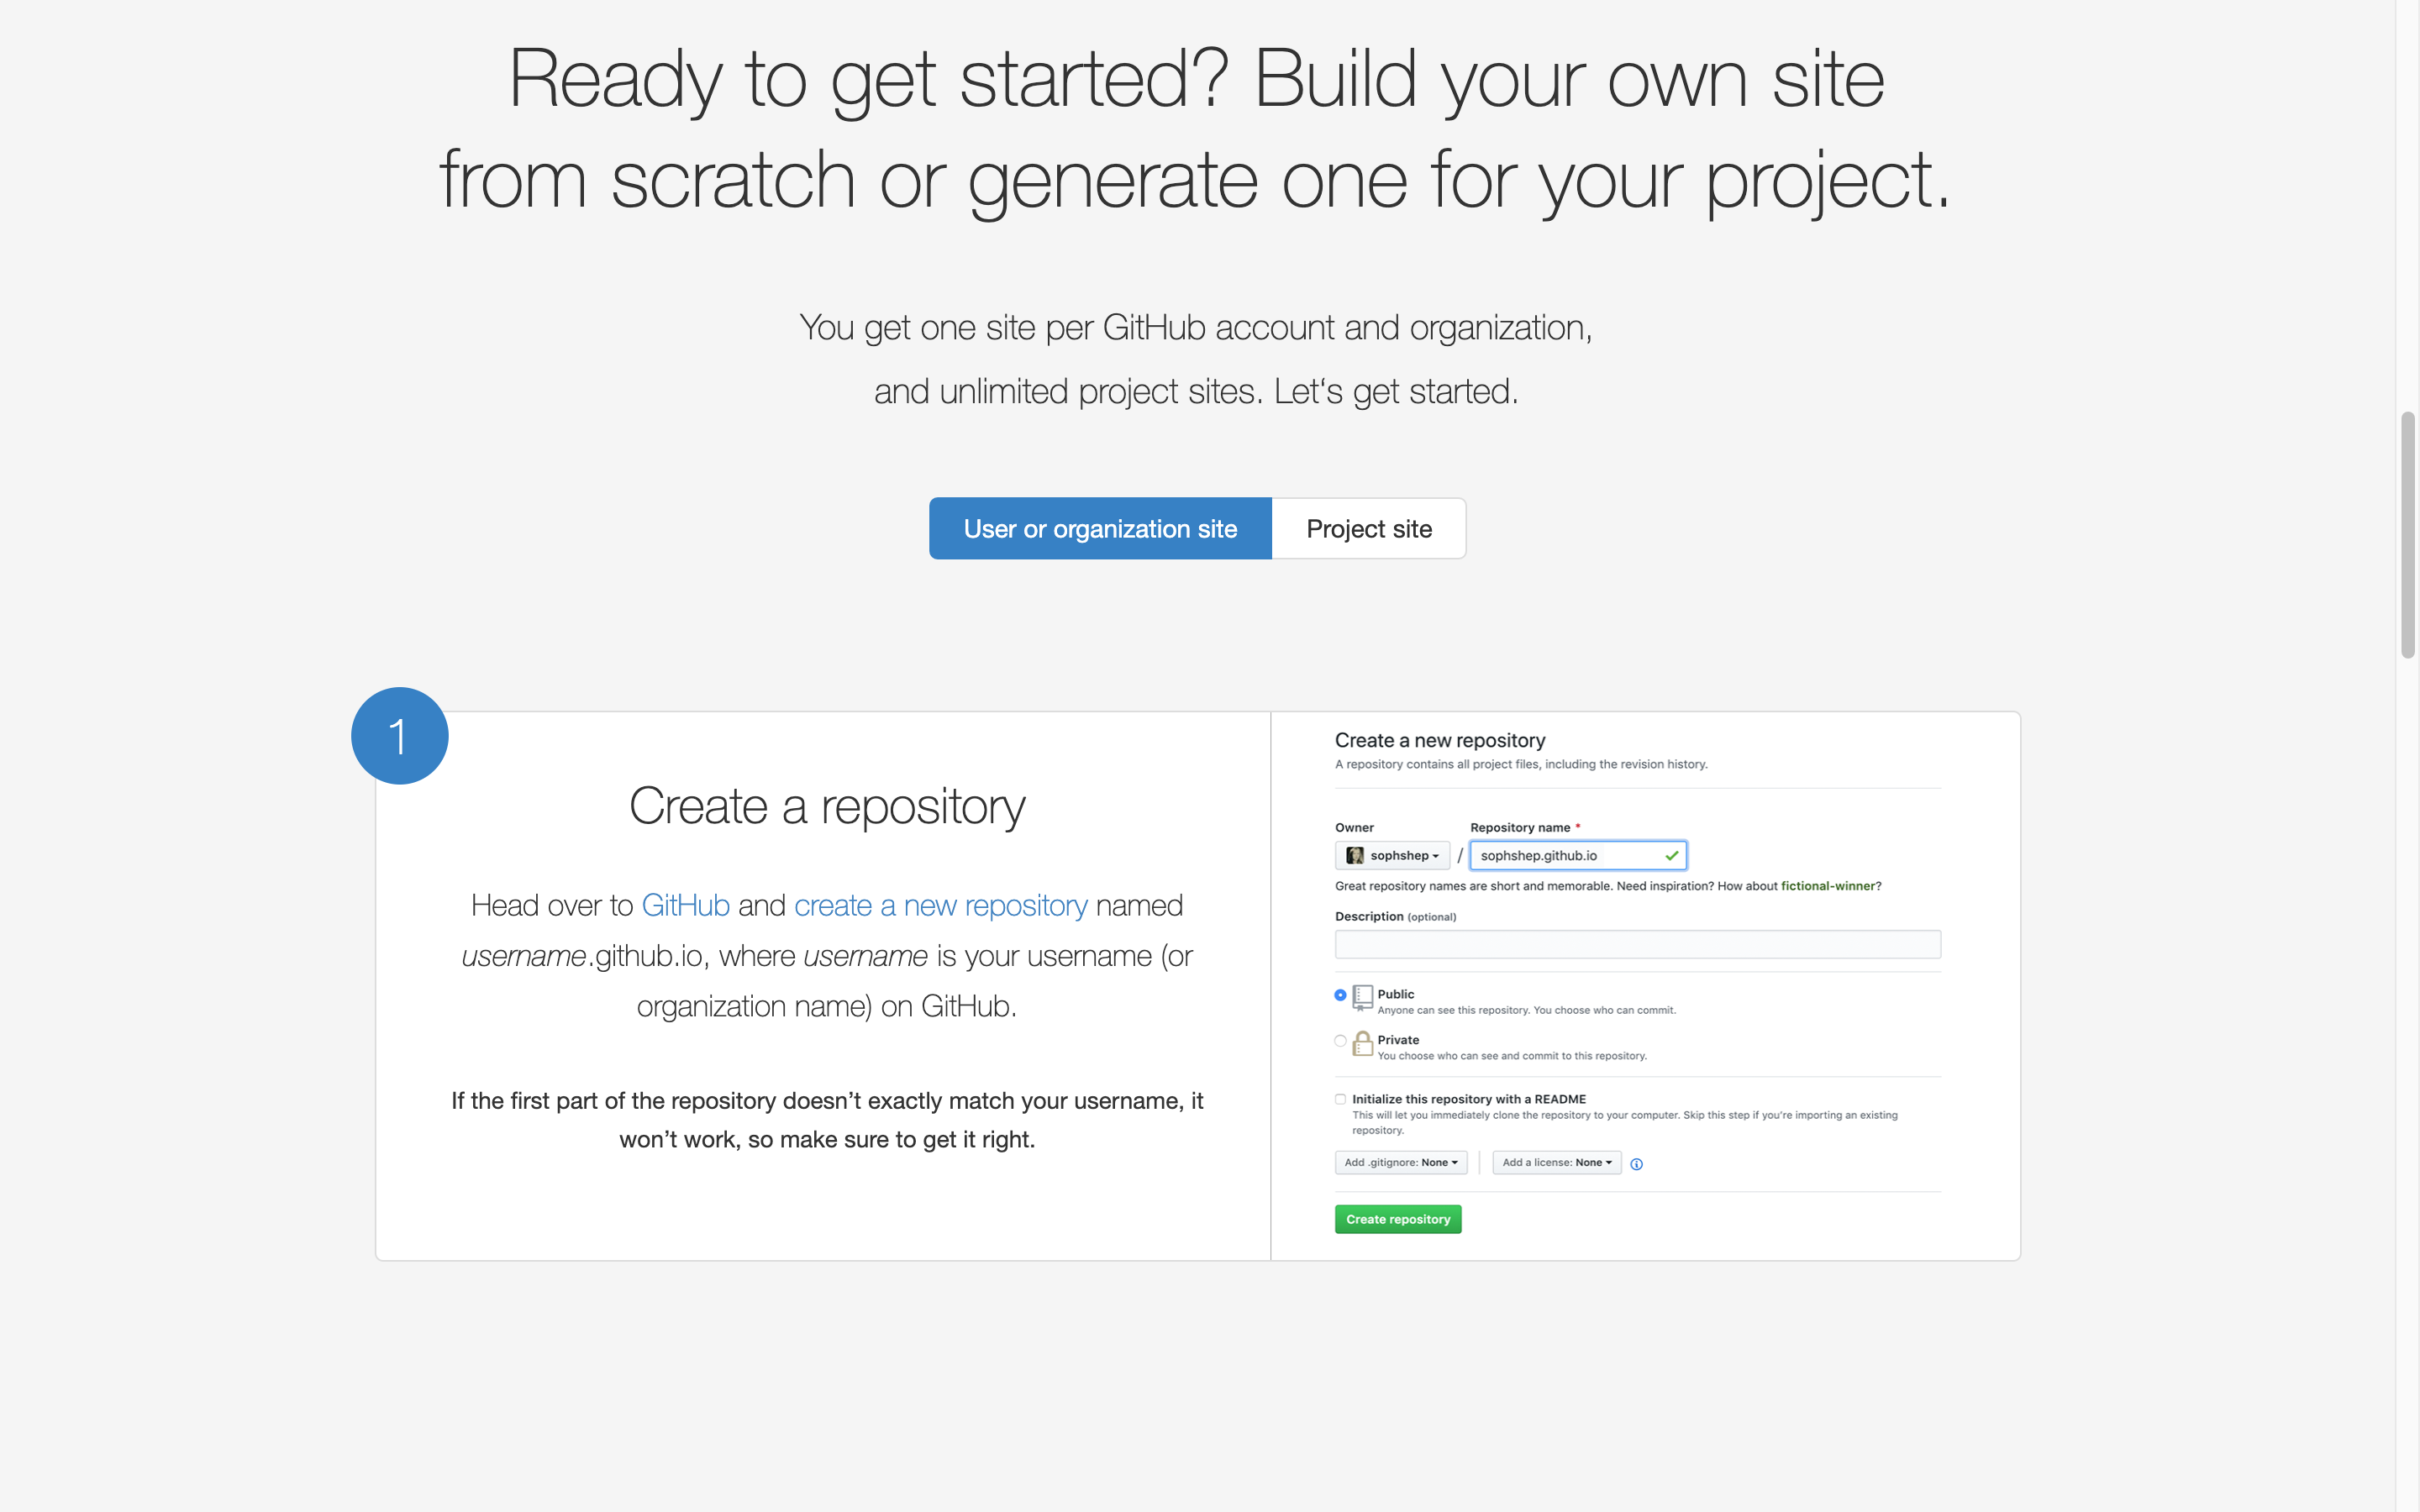 User or organization site, Project site